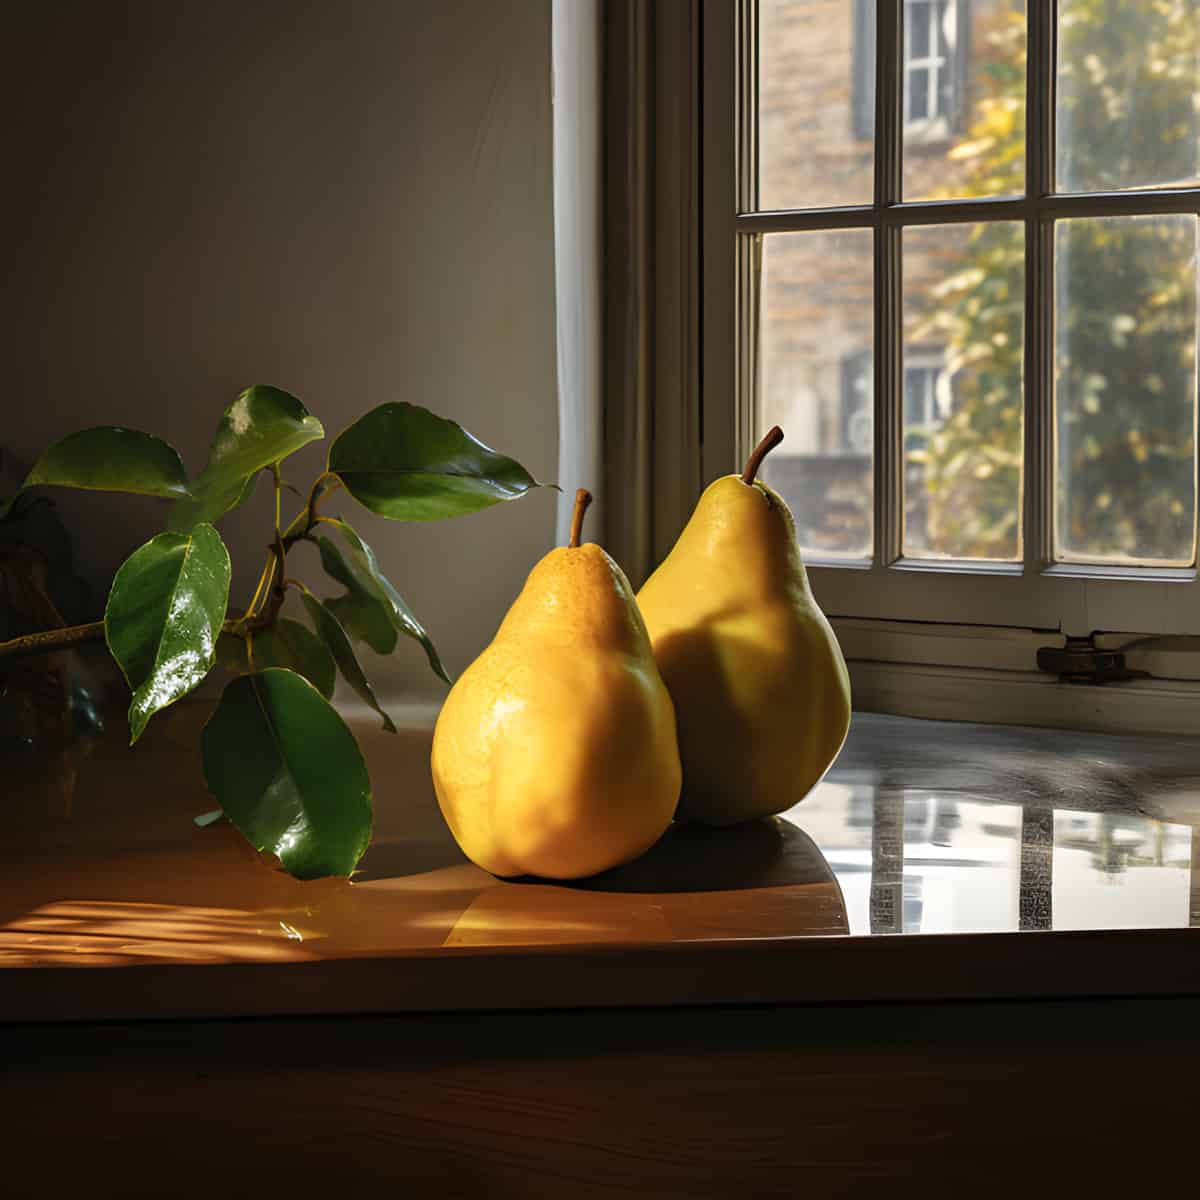 Pear on a kitchen counter